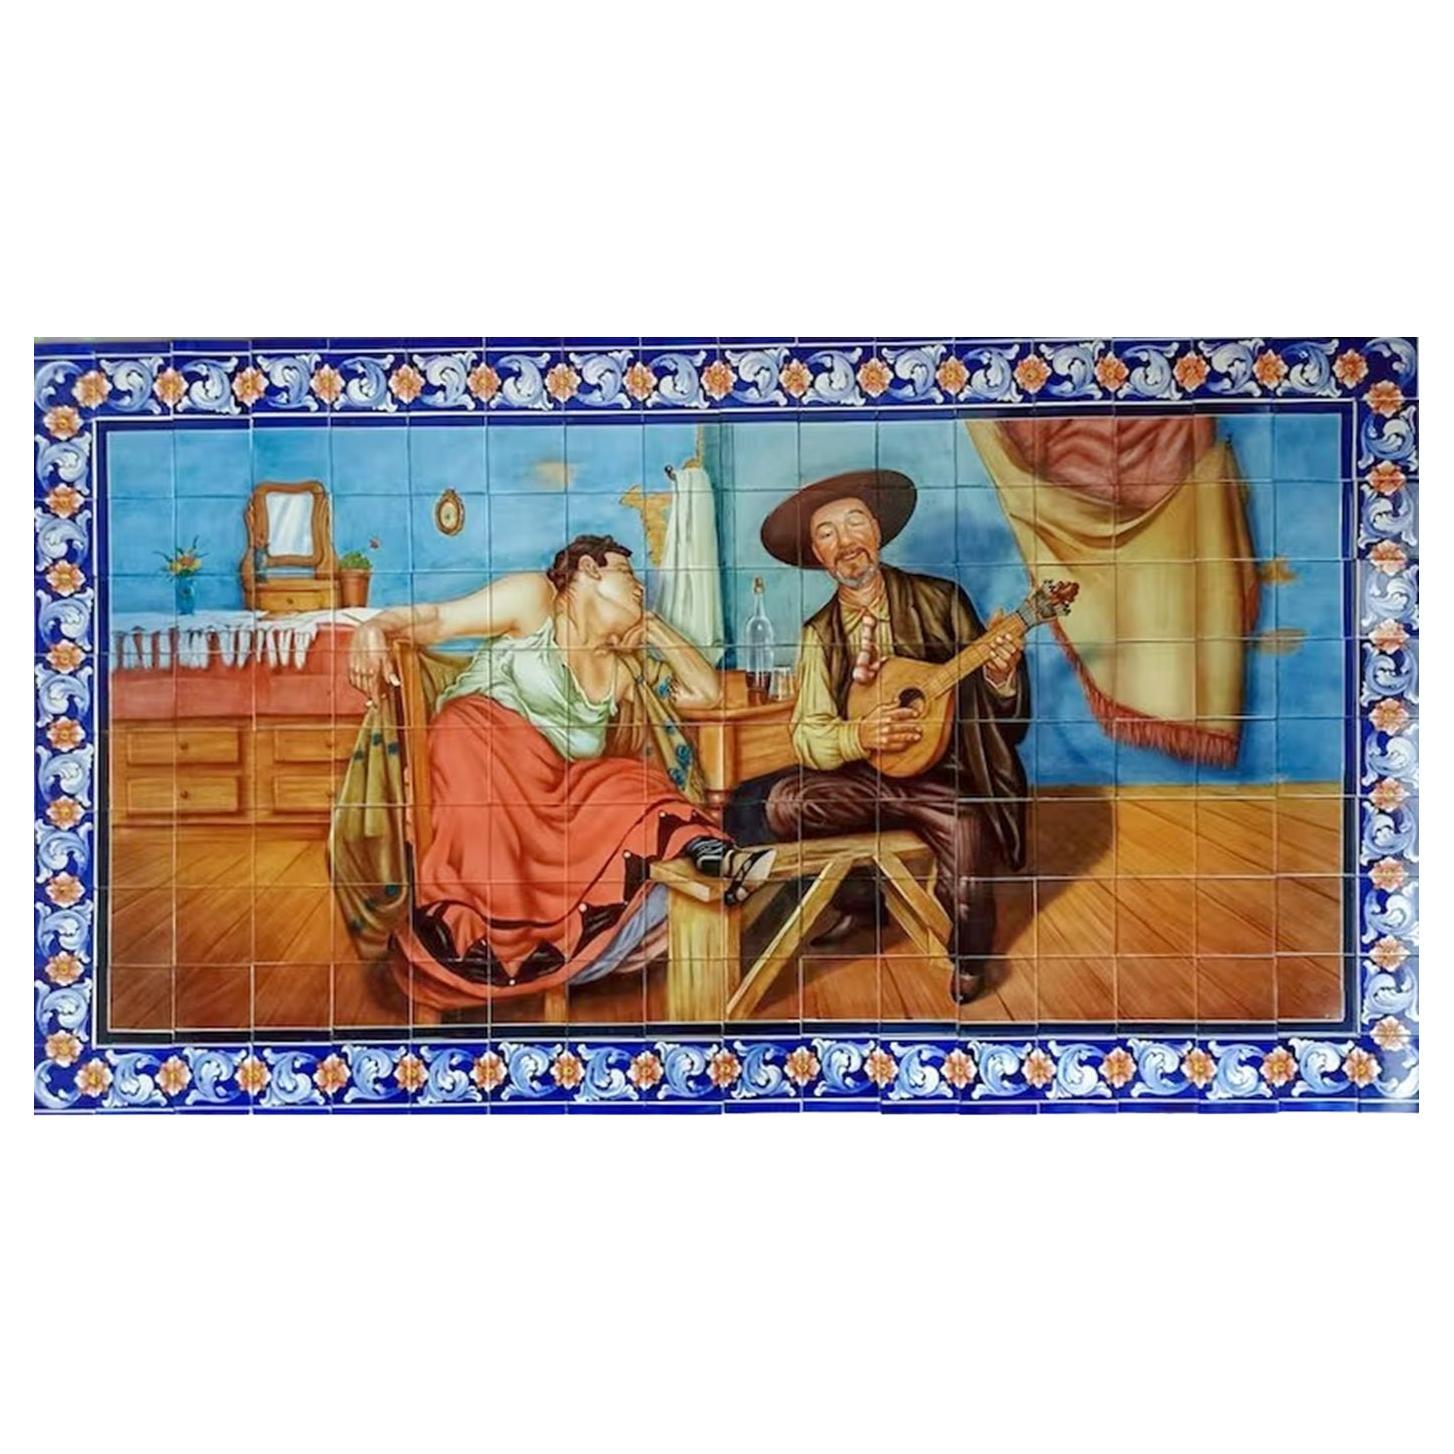 Portuguese Tile Mural - Hand Painted - Indoor/Outdoor Tiles "Fado"     For Sale